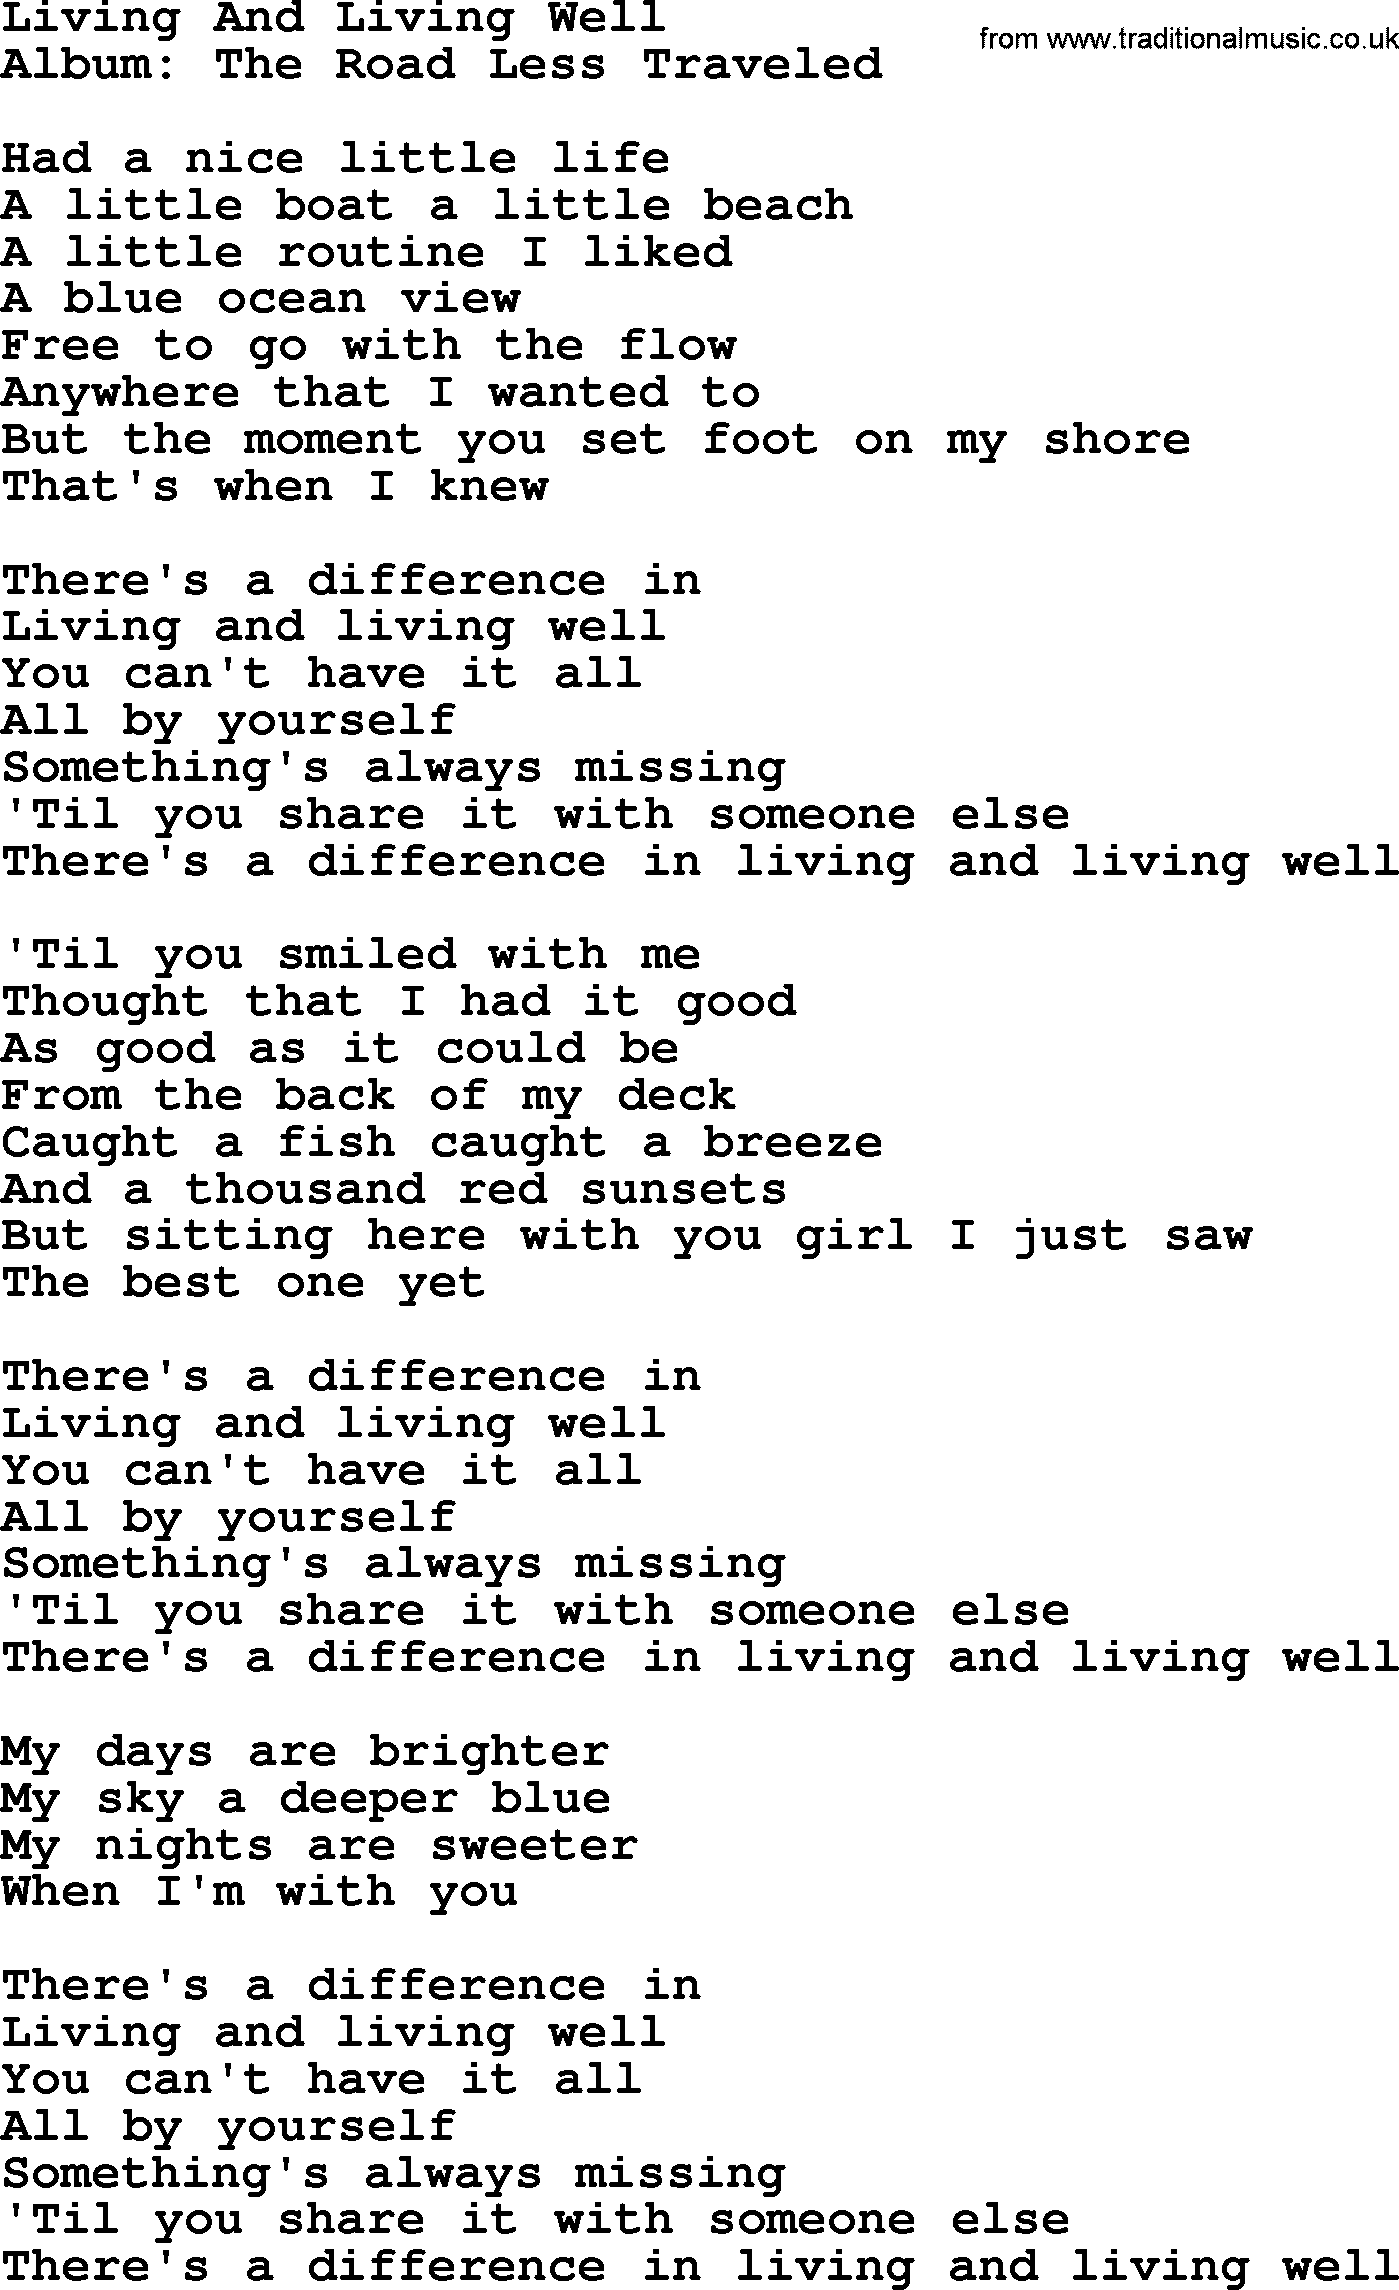 George Strait song: Living And Living Well, lyrics